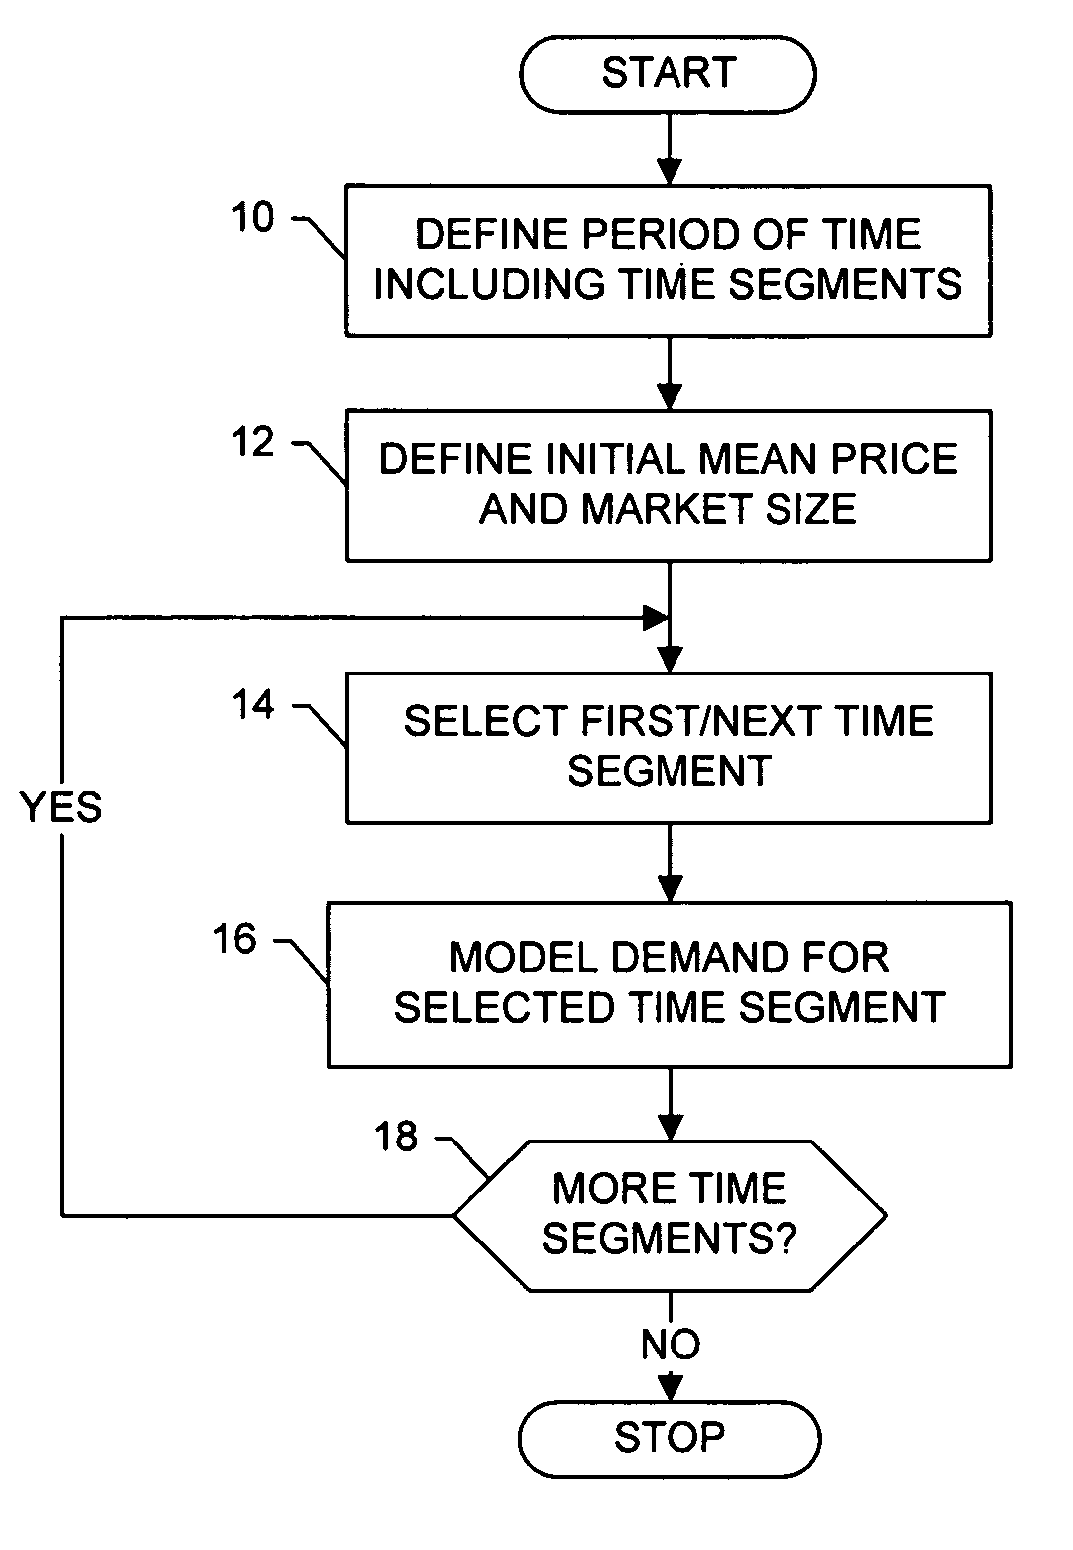 Systems, methods and computer program products for modeling uncertain future demand, supply and associated profitability of a good